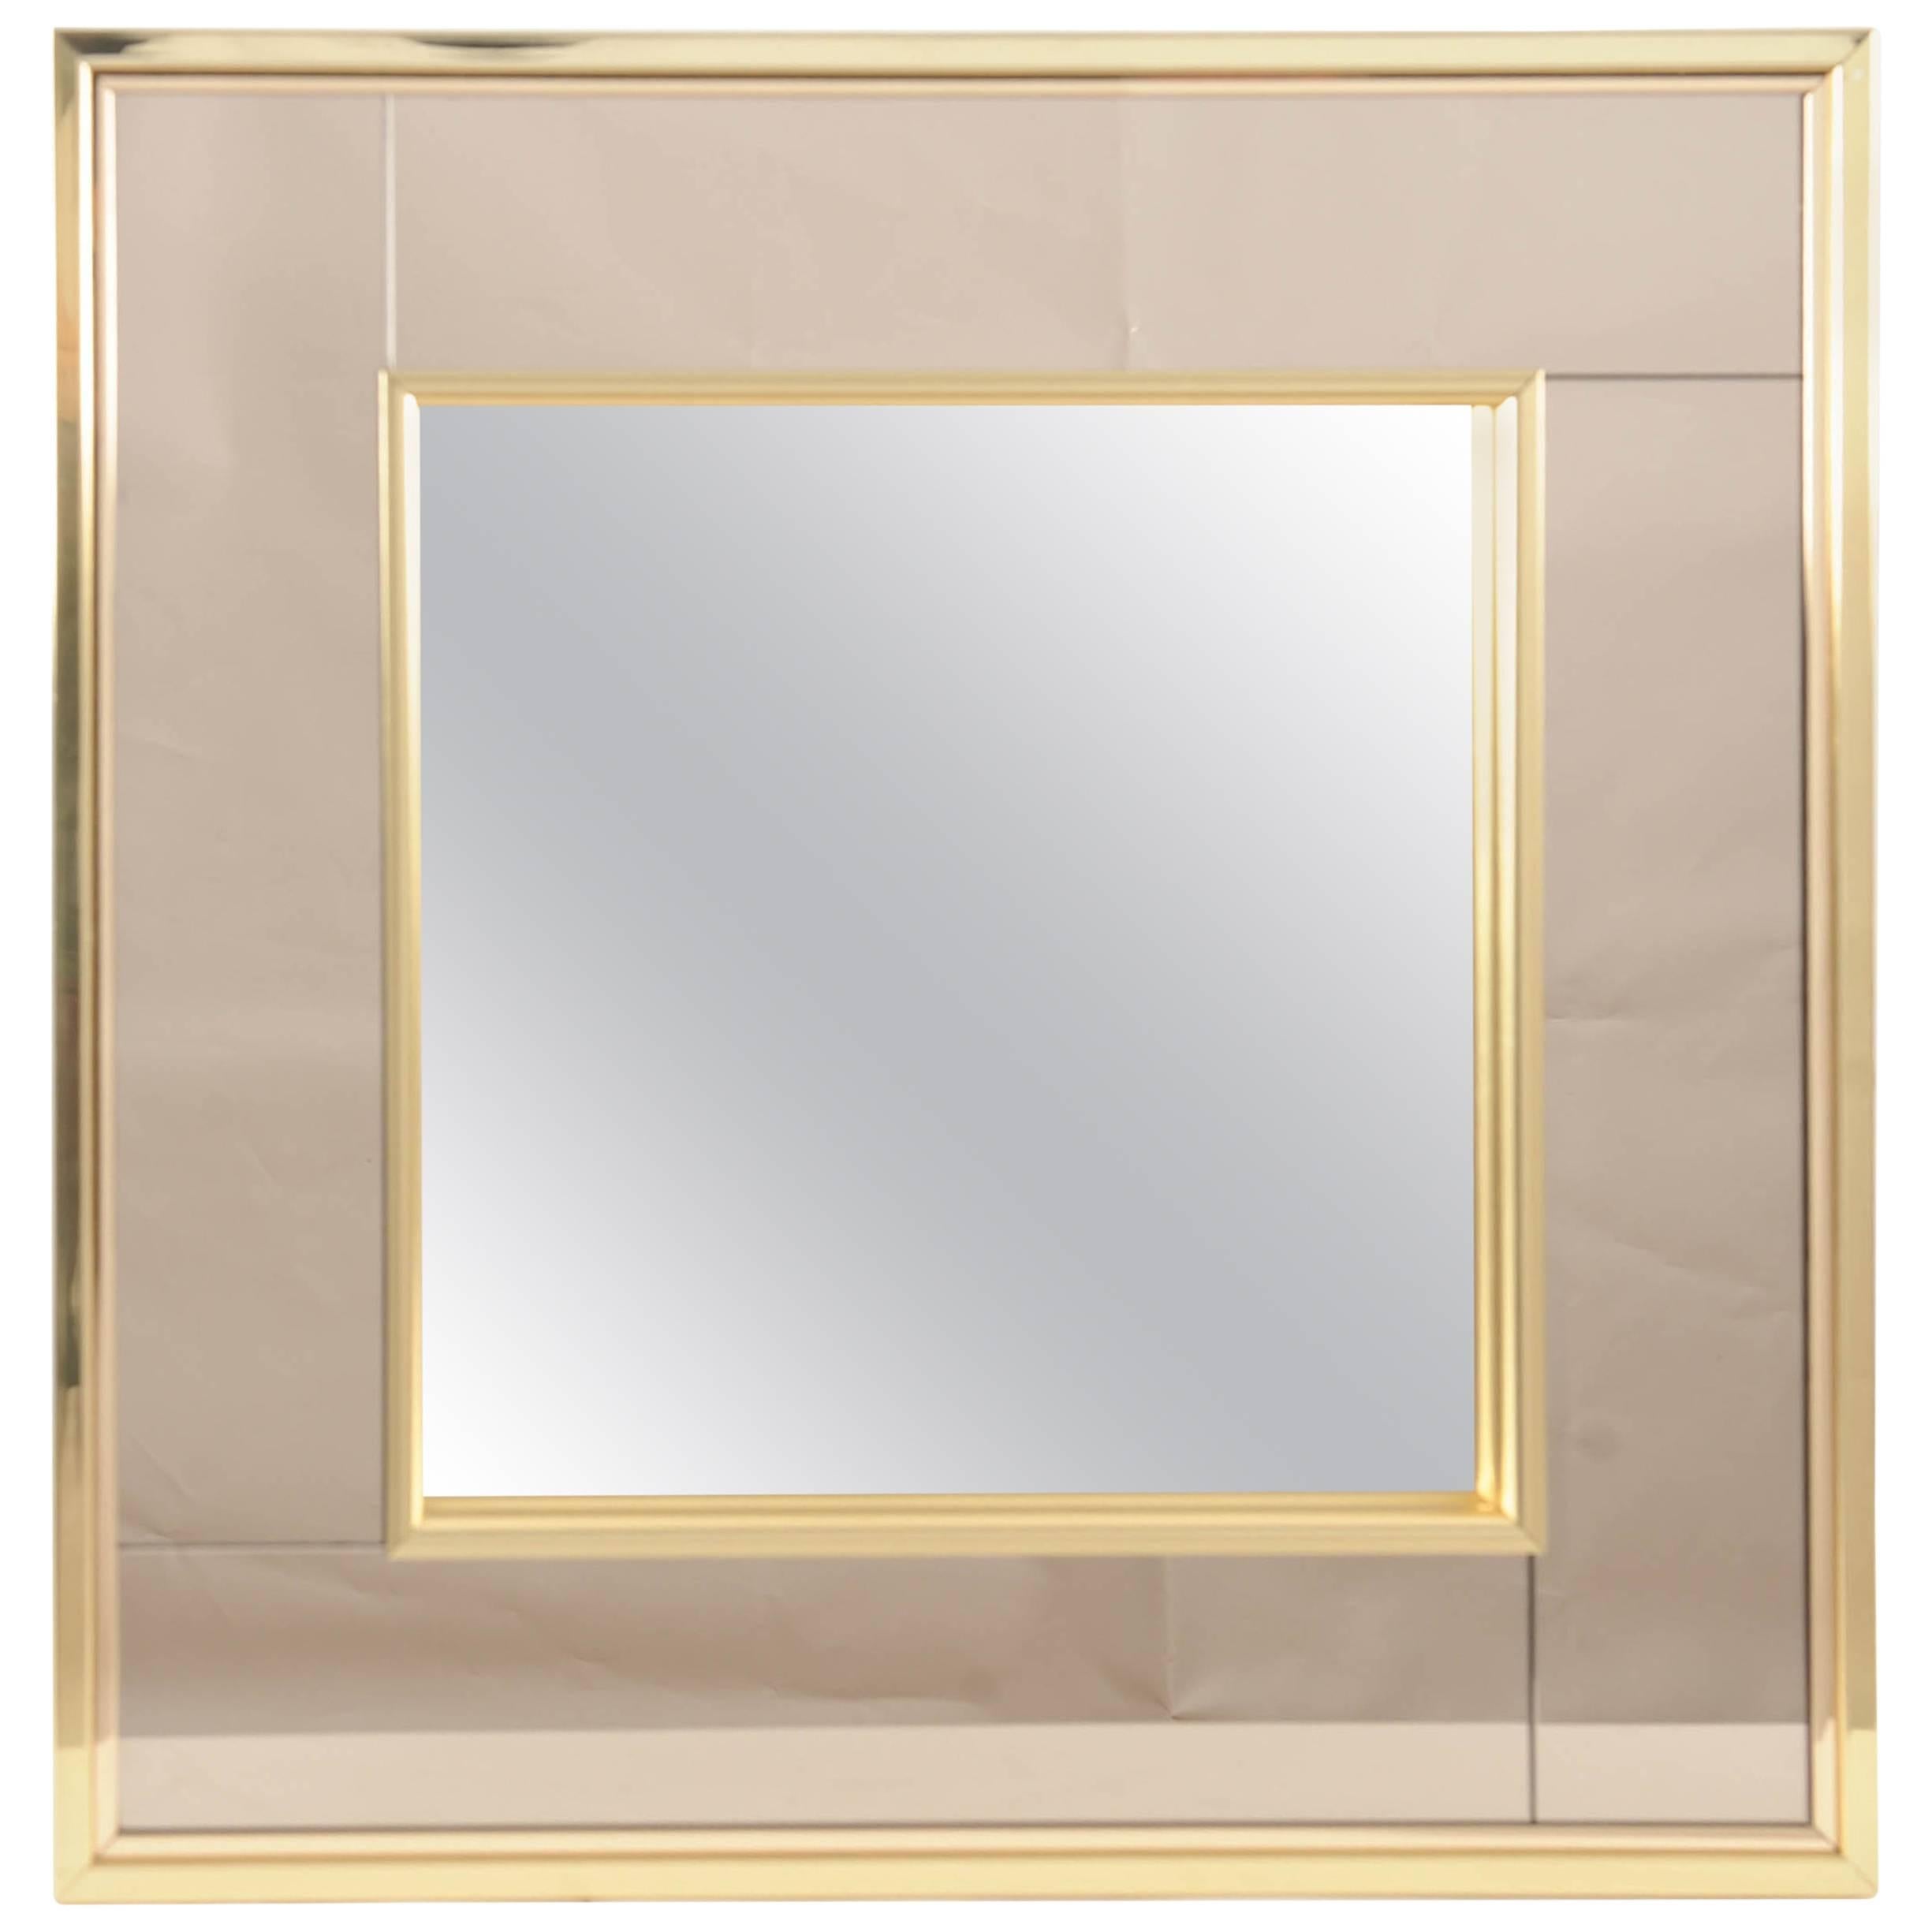 Marvellous Square Two-Toned Mirror in Brass Frame